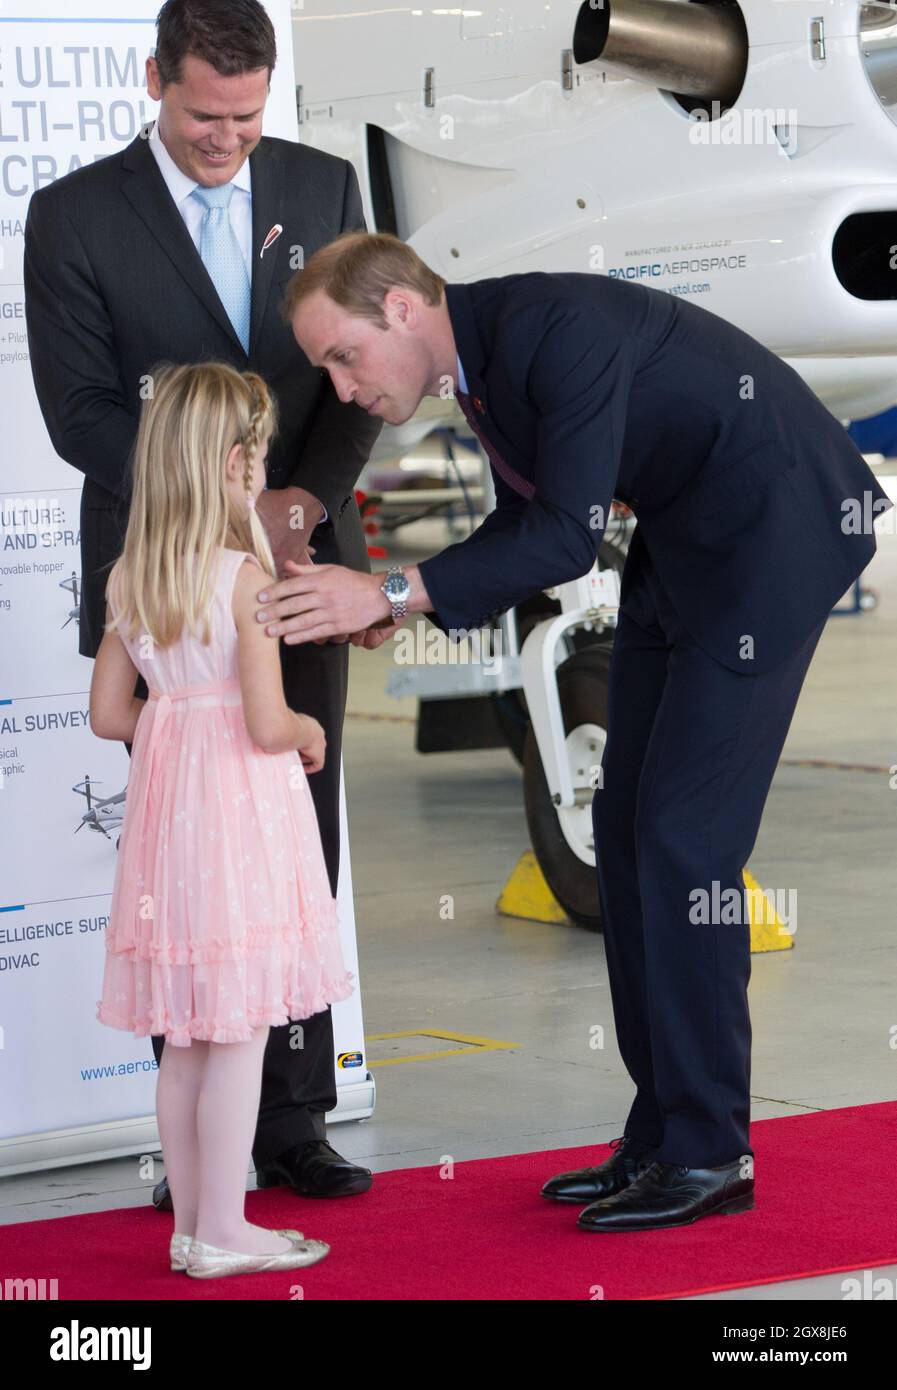 Prince William, Duke of Cambridge bends to talk to a girl during a visit to Pacific Aerospace in Hamilton, New Zealand Stock Photo